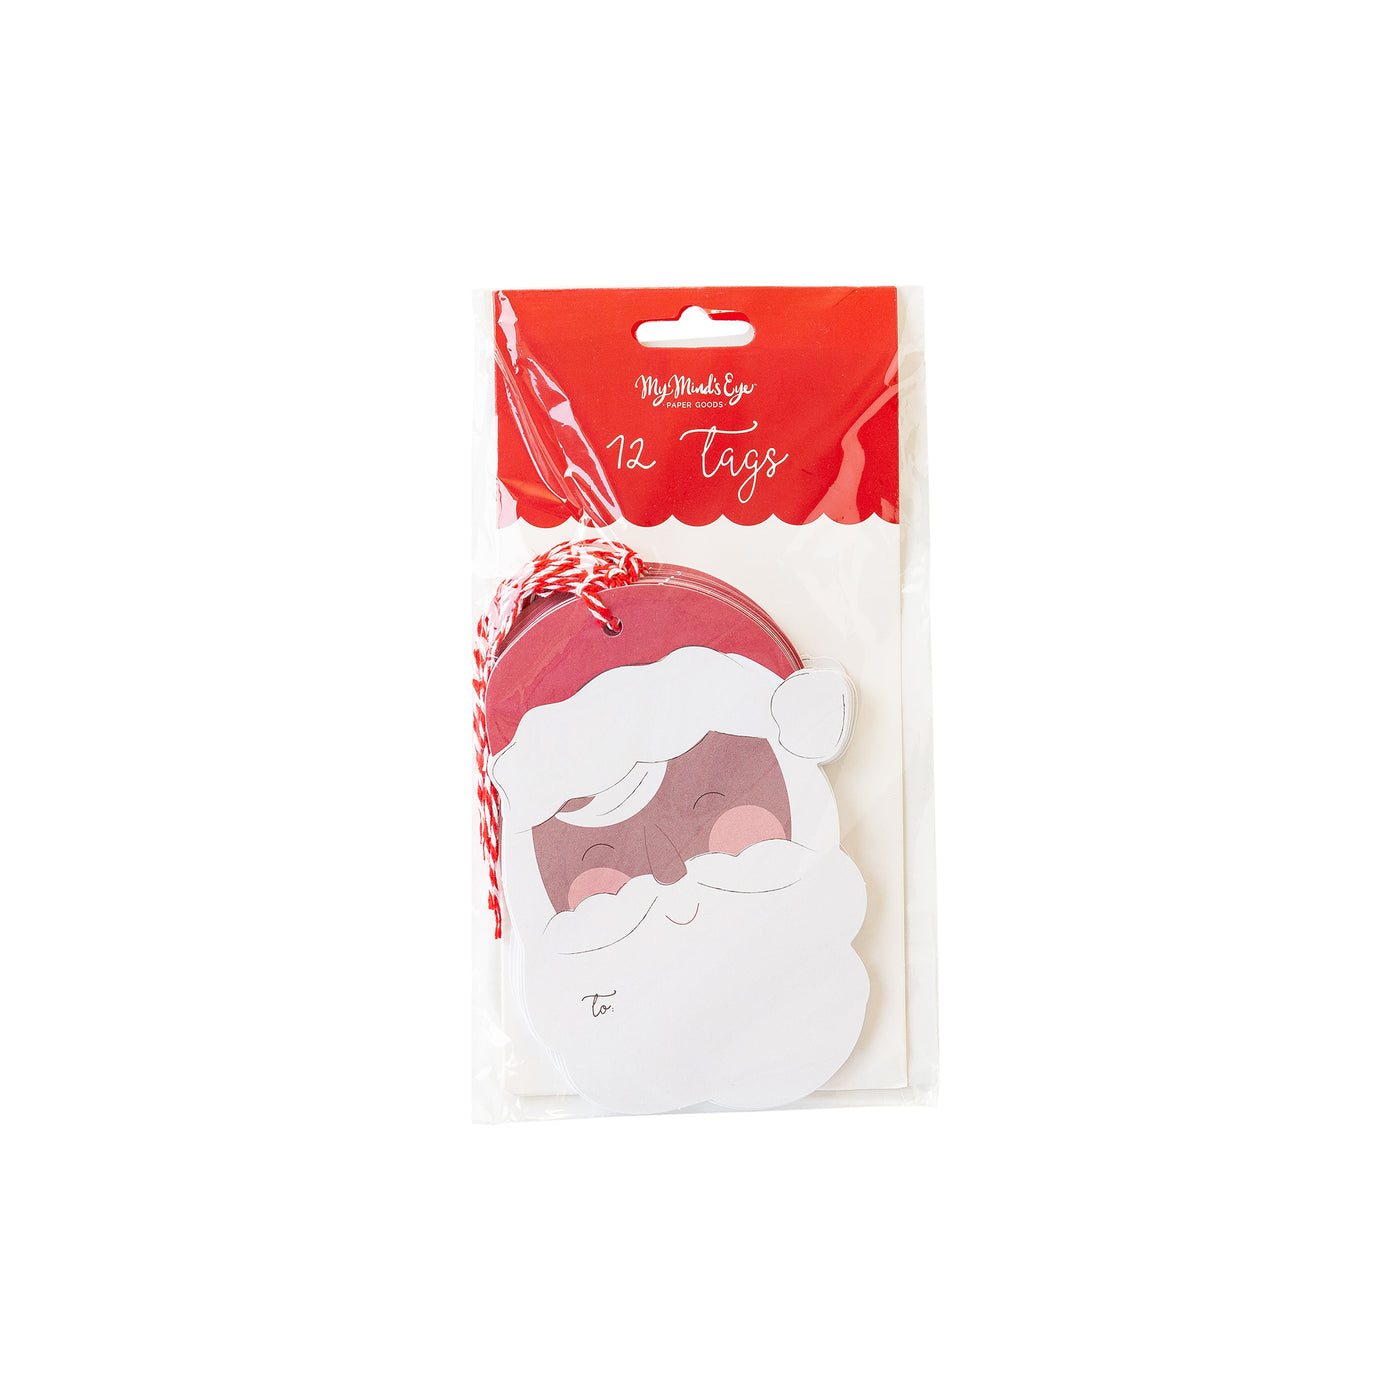 PLGT129 - Santa Face 2 Over-sized Tags